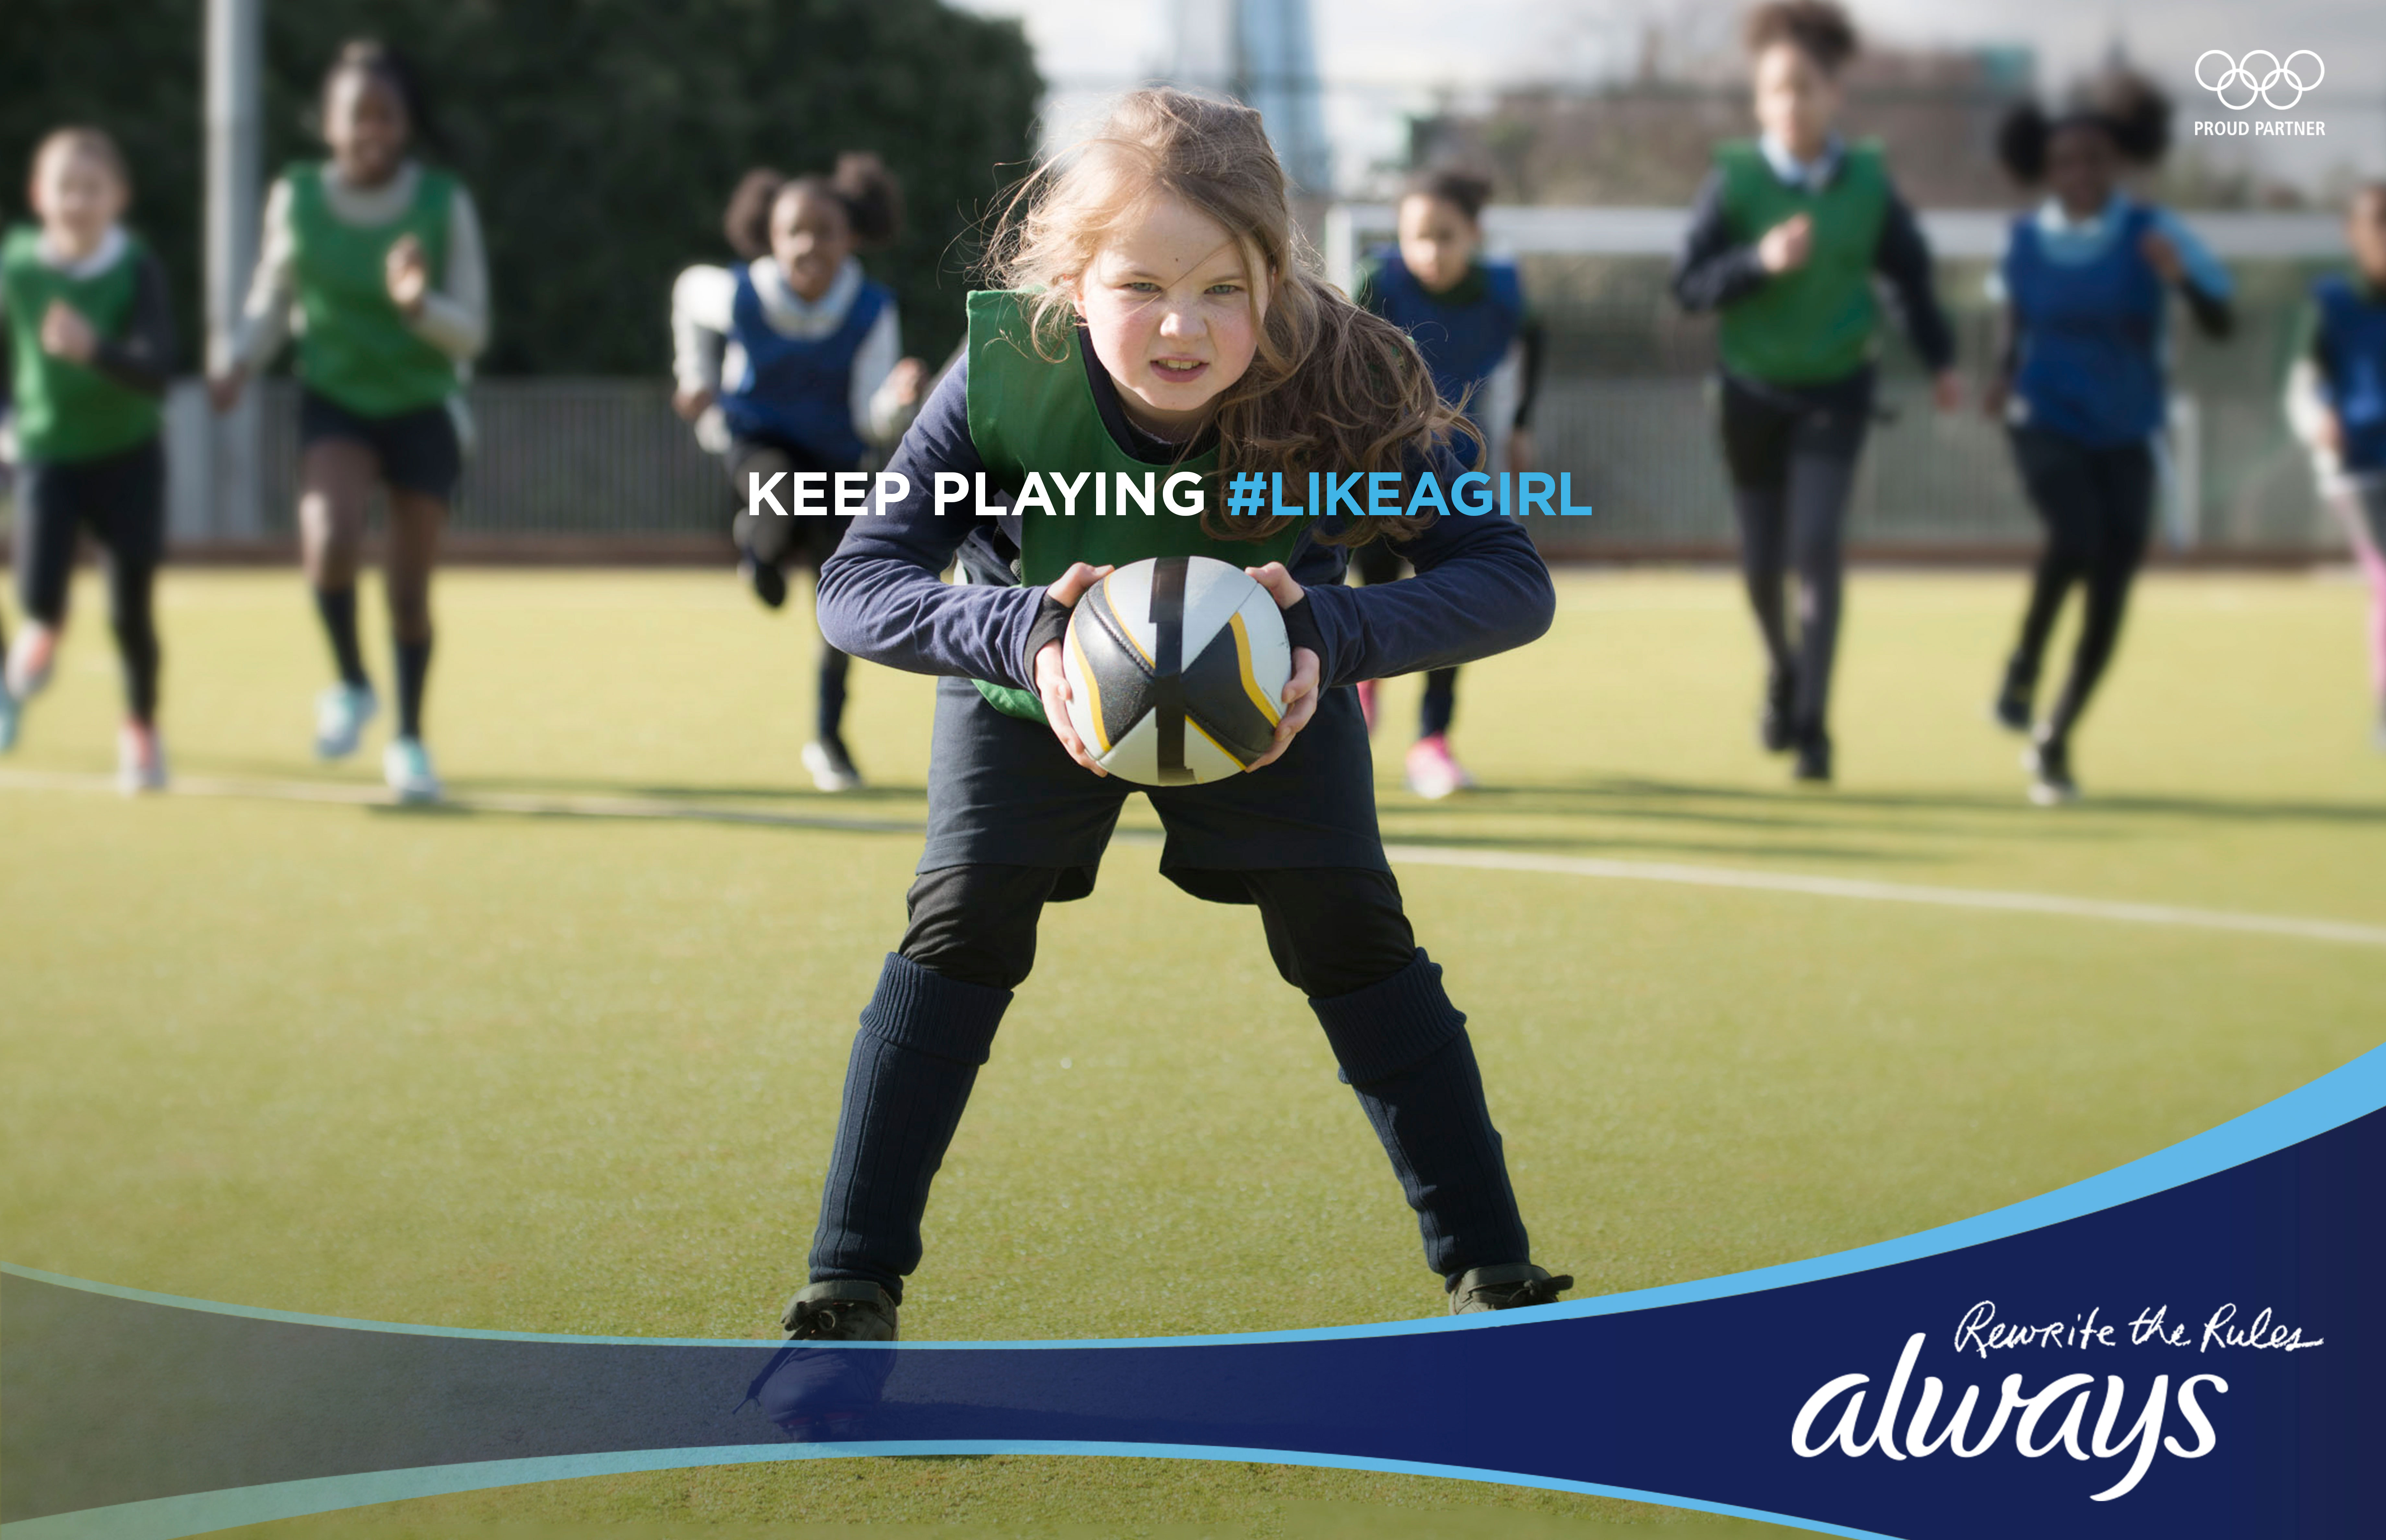 Half of Girls Quit Sports By the End of Puberty*: New Always® #LikeAGirl  Video Examines Cause – together with Olympic gold medalist Alex Morgan -  Encourages Girls Everywhere to Keep Playing #LikeAGirl